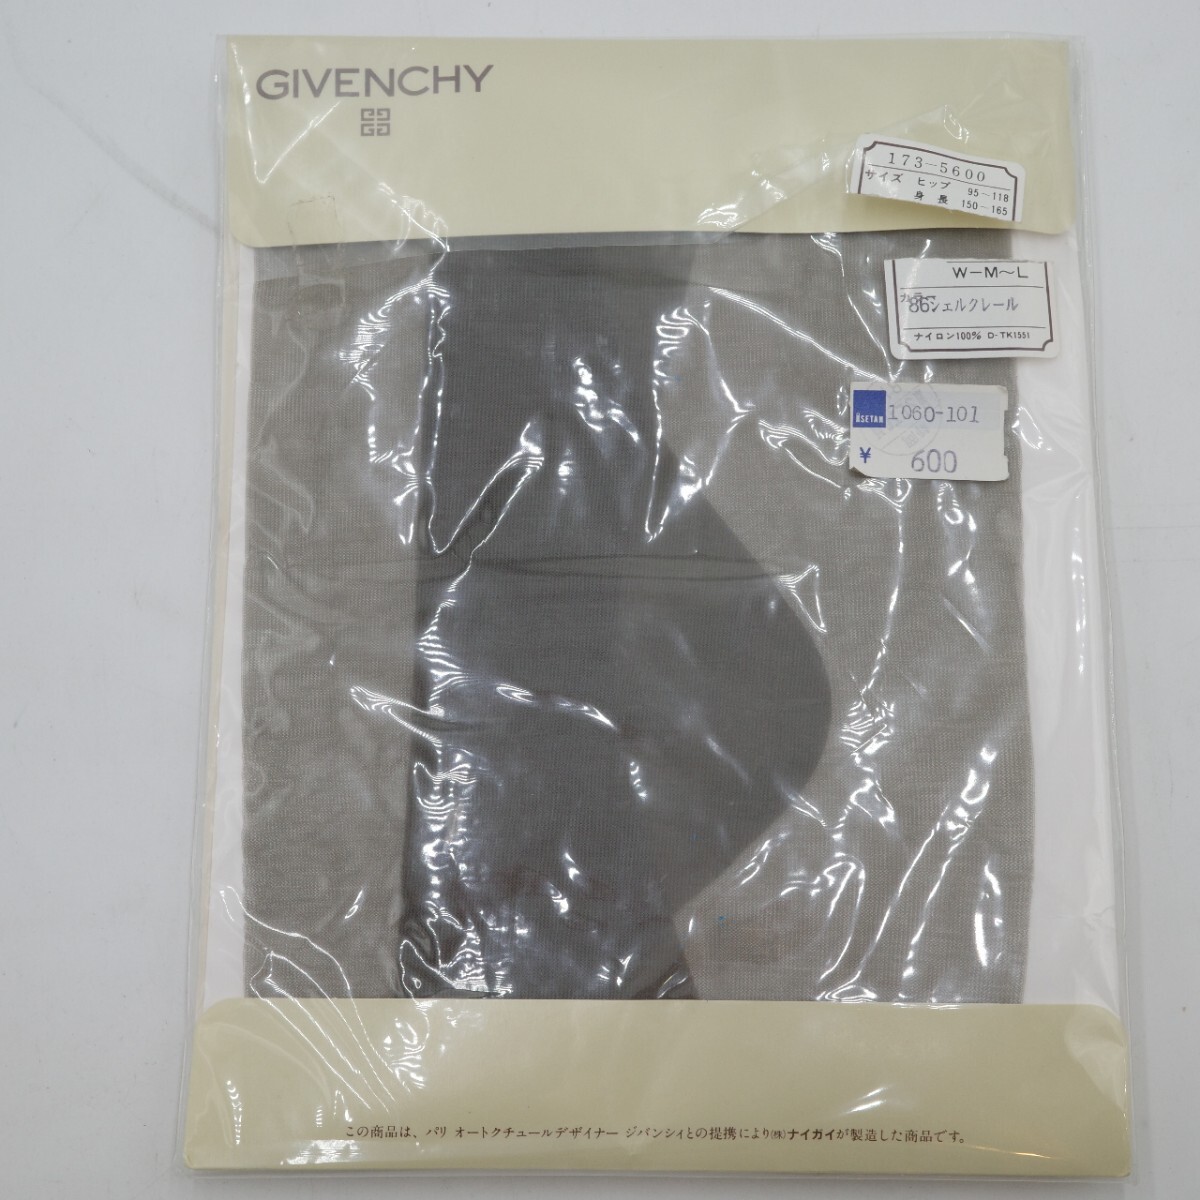 1 jpy all GIVENCHY Givenchy plate coffee cup mug pot perfume etc. 10 point summarize Western-style tableware brand tableware new goods somewhat larger quantity 